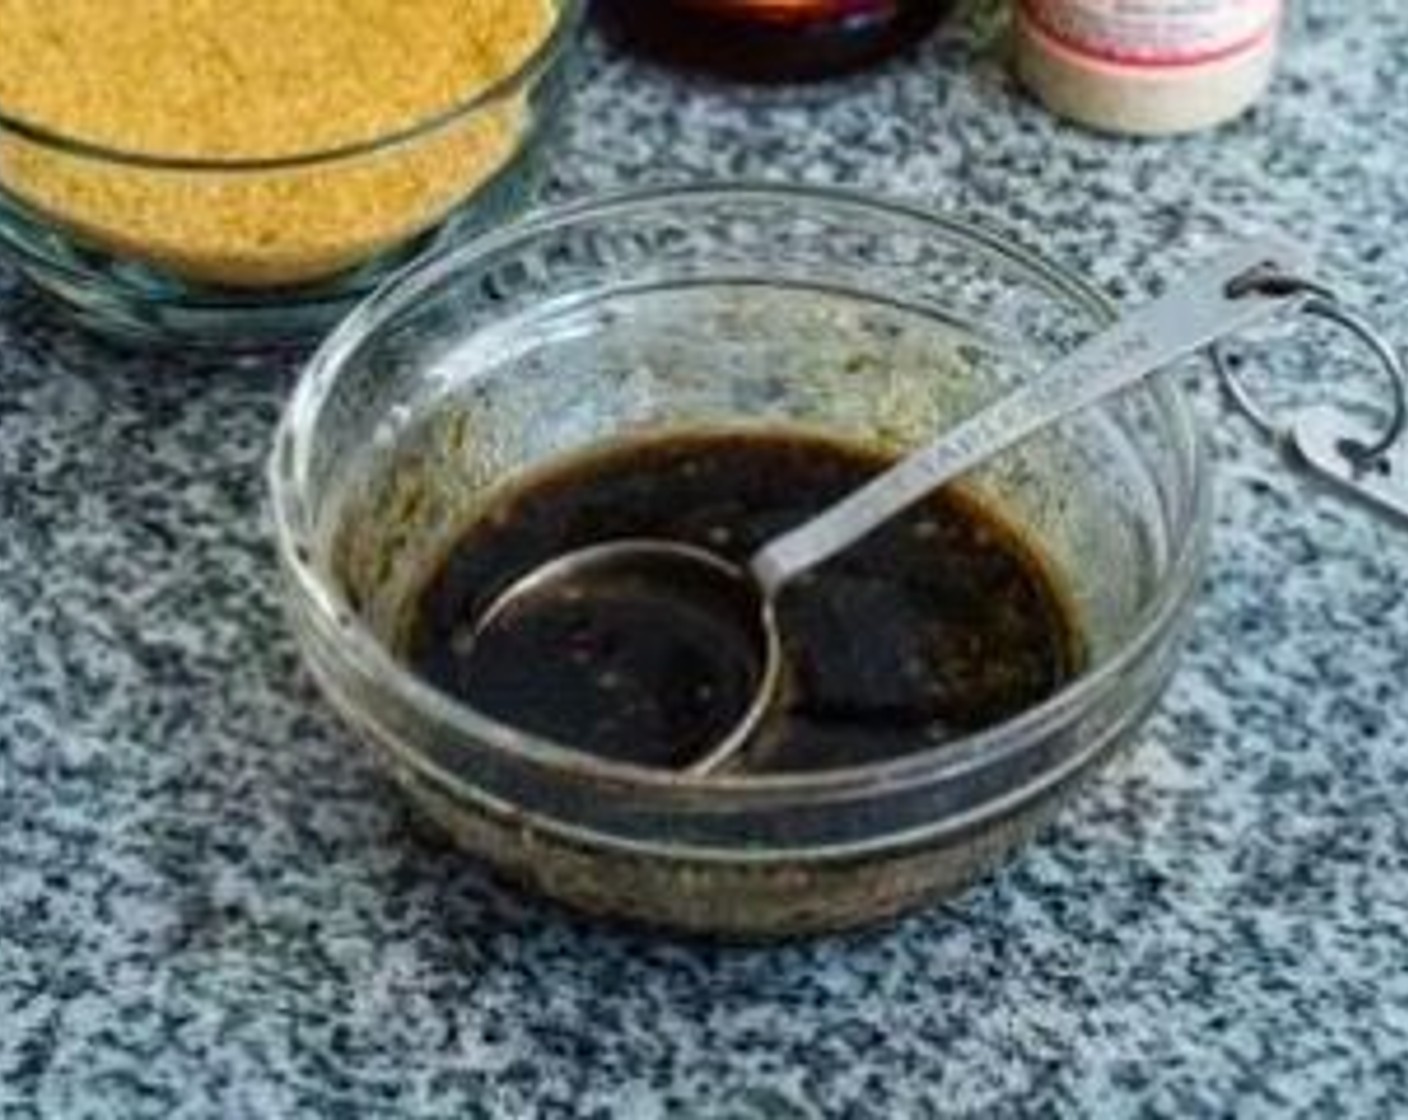 step 1 In a bowl, combine the Shaoxing Cooking Wine (3 Tbsp), Soy Sauce (3 Tbsp), Dark Soy Sauce (1 Tbsp), Sesame Oil (1 tsp), Brown Sugar (1 Tbsp), and Ground White Pepper (3 dashes).